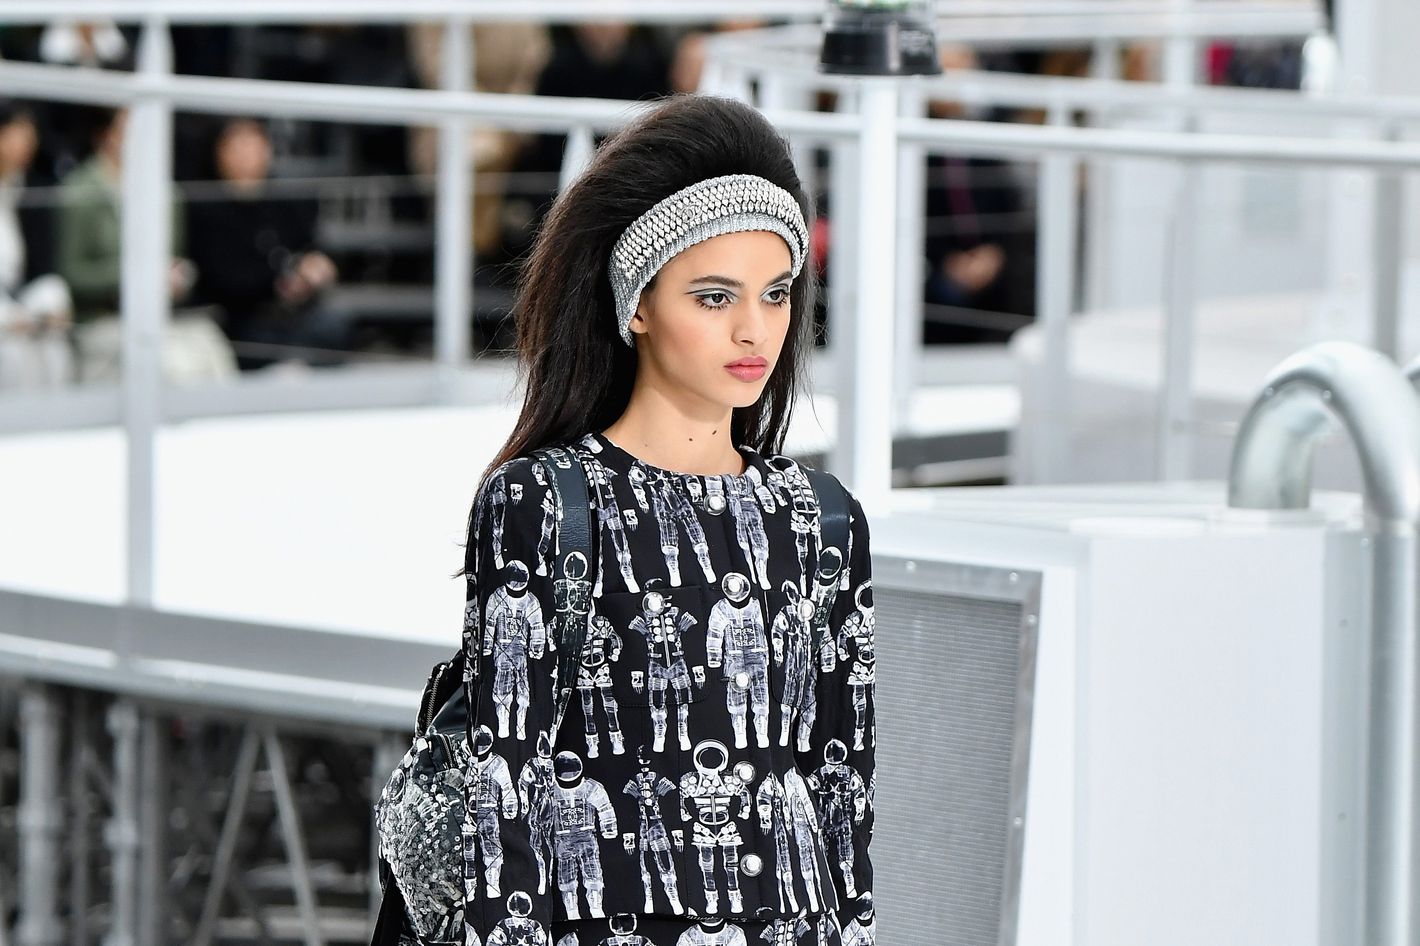 Chanel Launched a Rocket at Its Fall 2017 Show